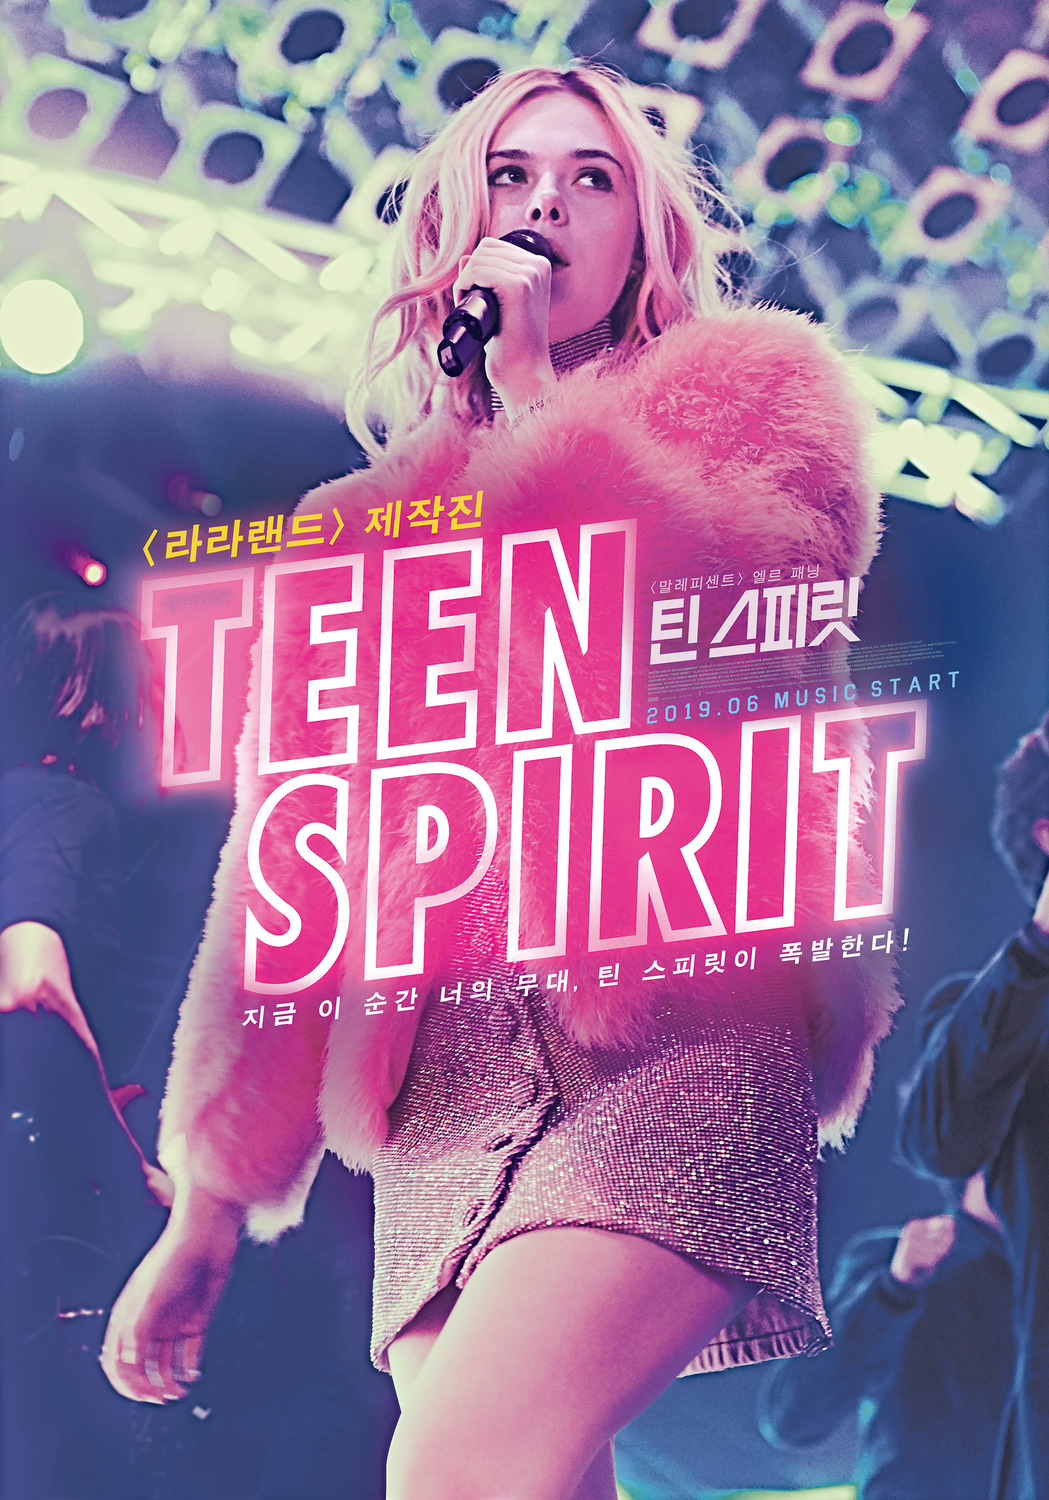 Extra Large Movie Poster Image for Teen Spirit (#2 of 2)